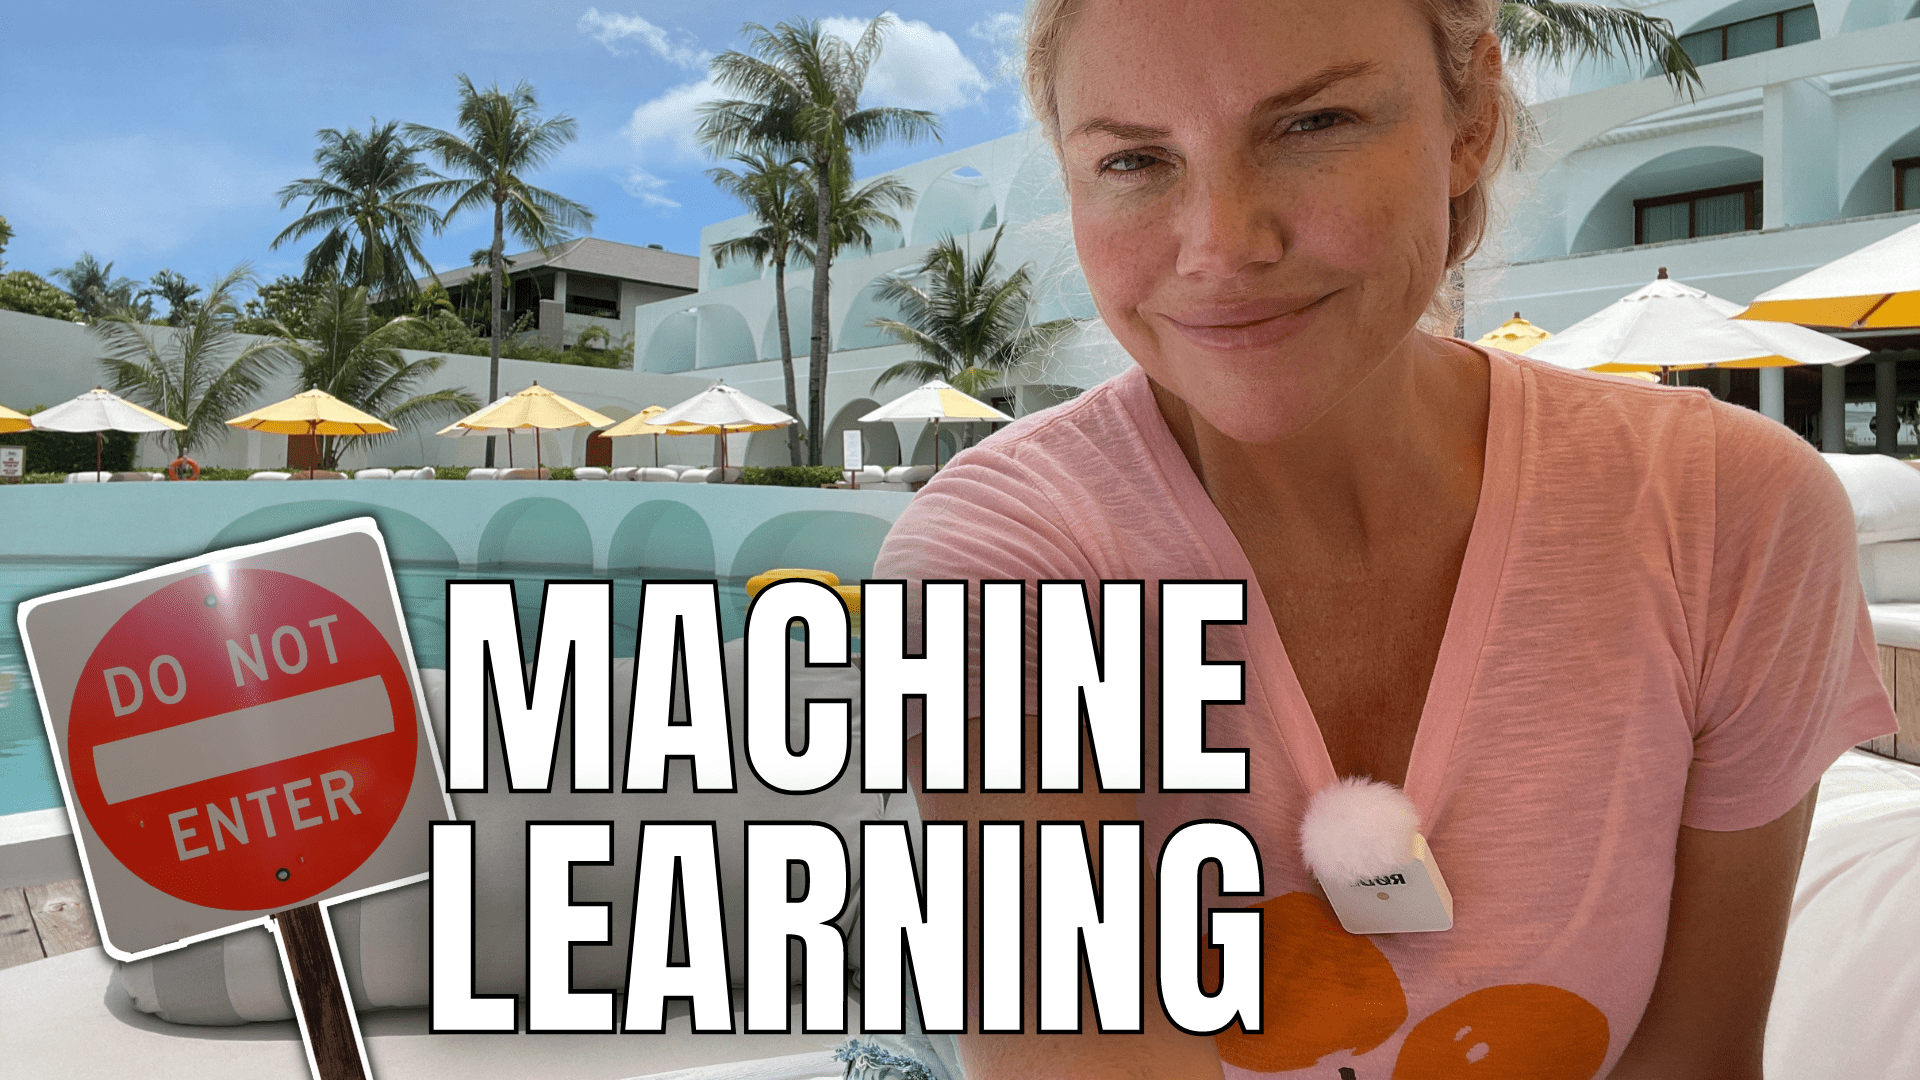 Top 4 reasons NOT to learn machine learning